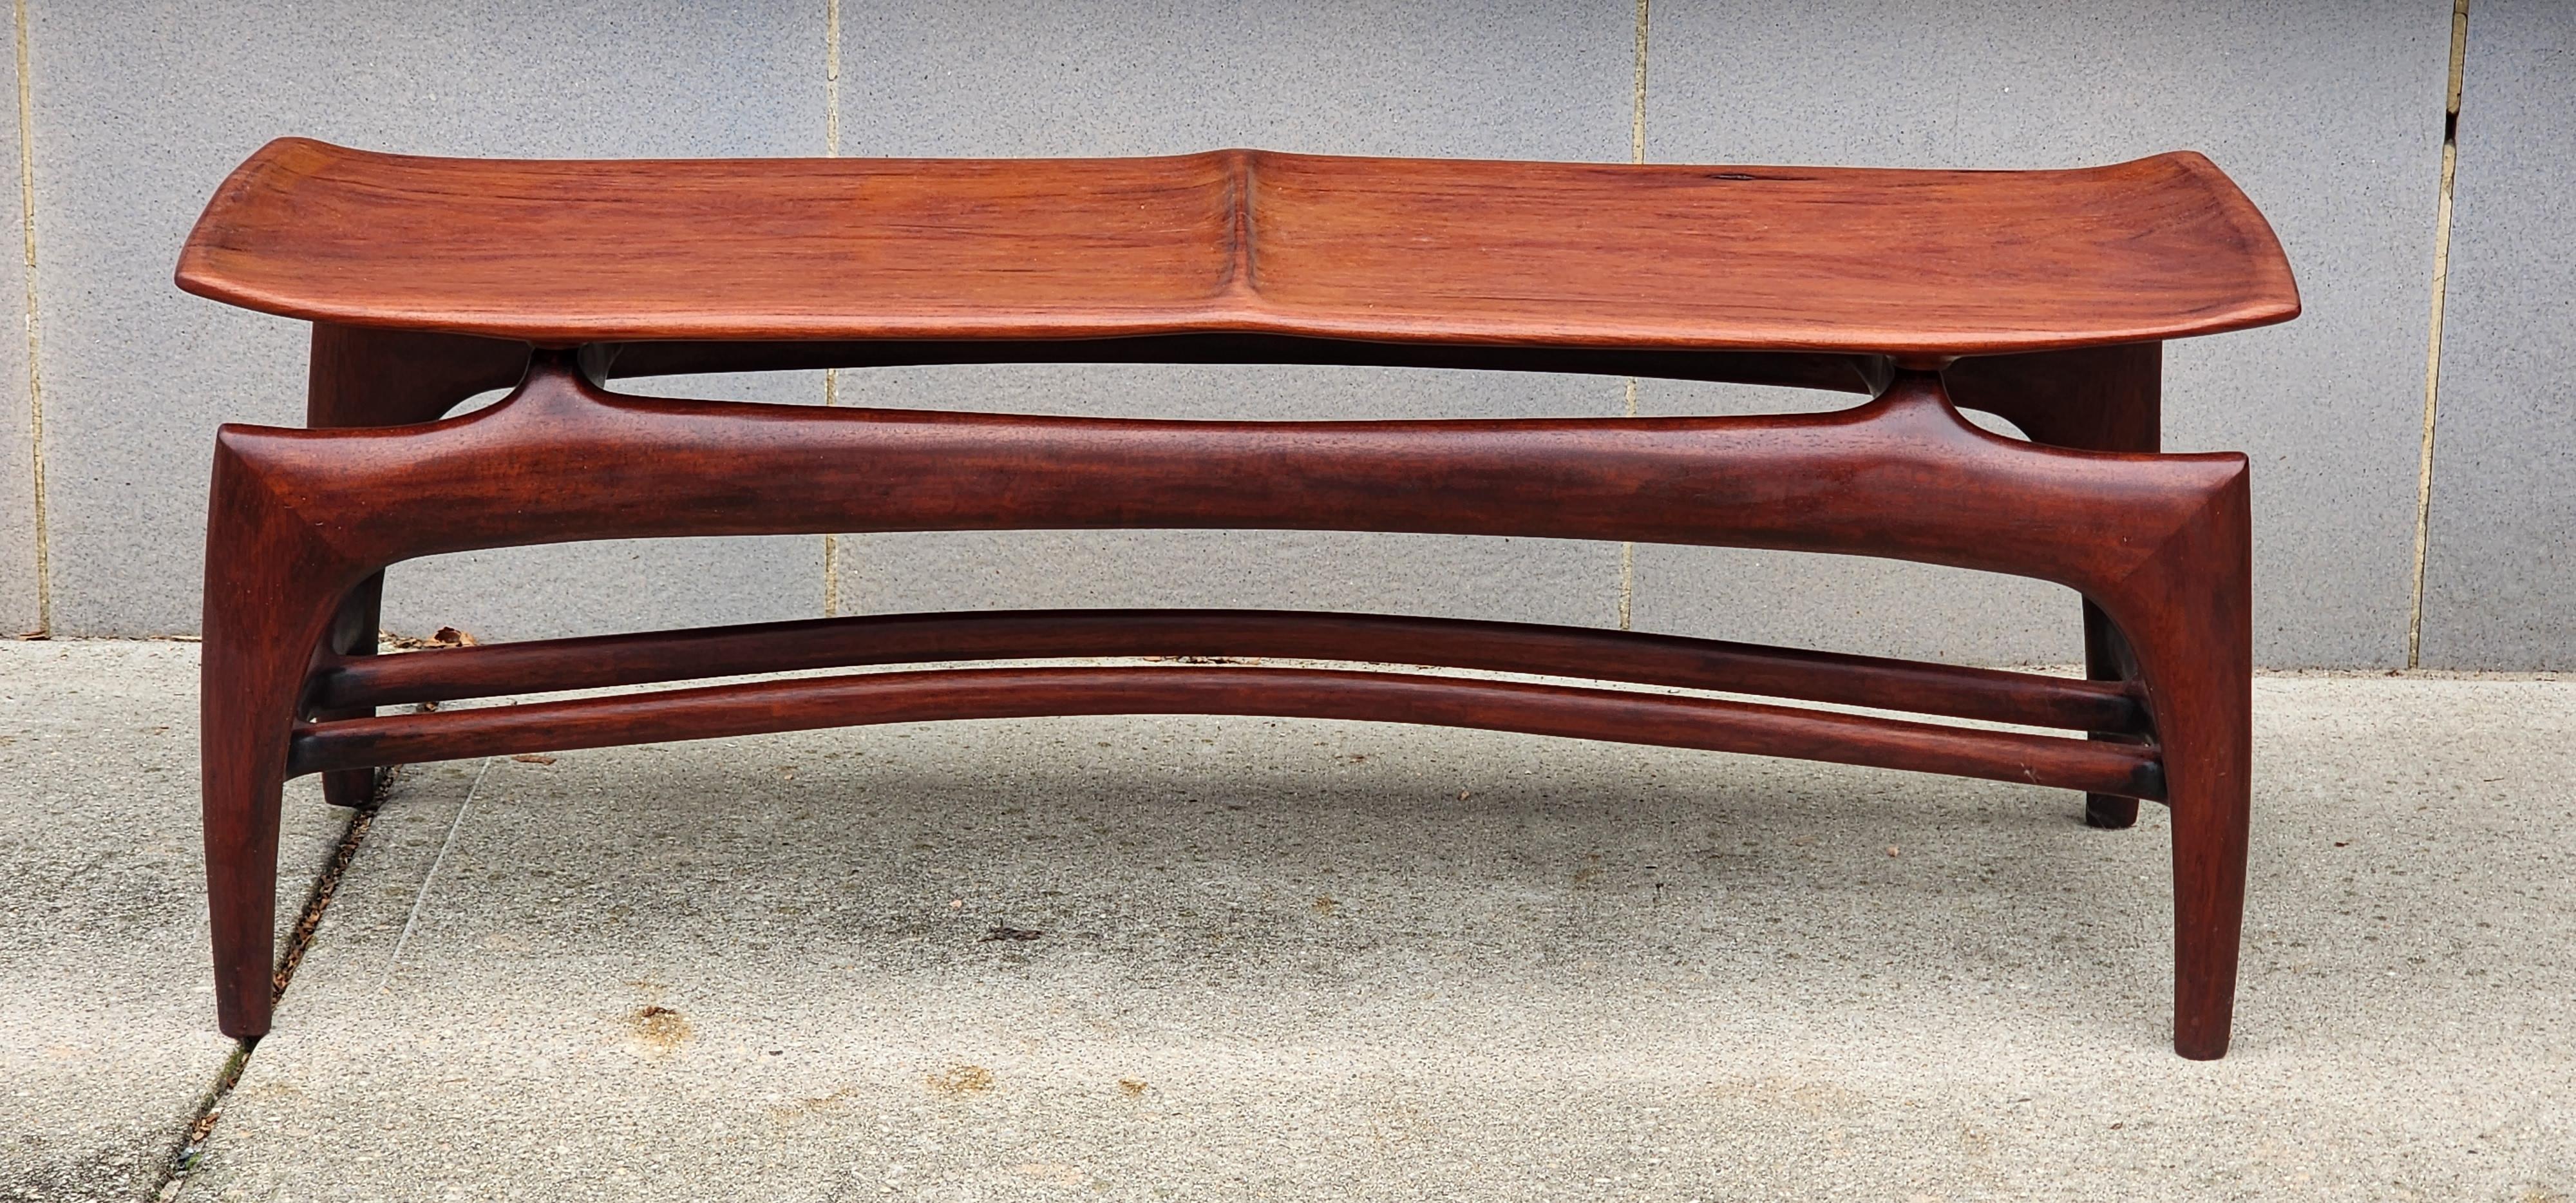 Vintage Rosewood Sculptural Studio Made Coffee Table or Bench For Sale 1